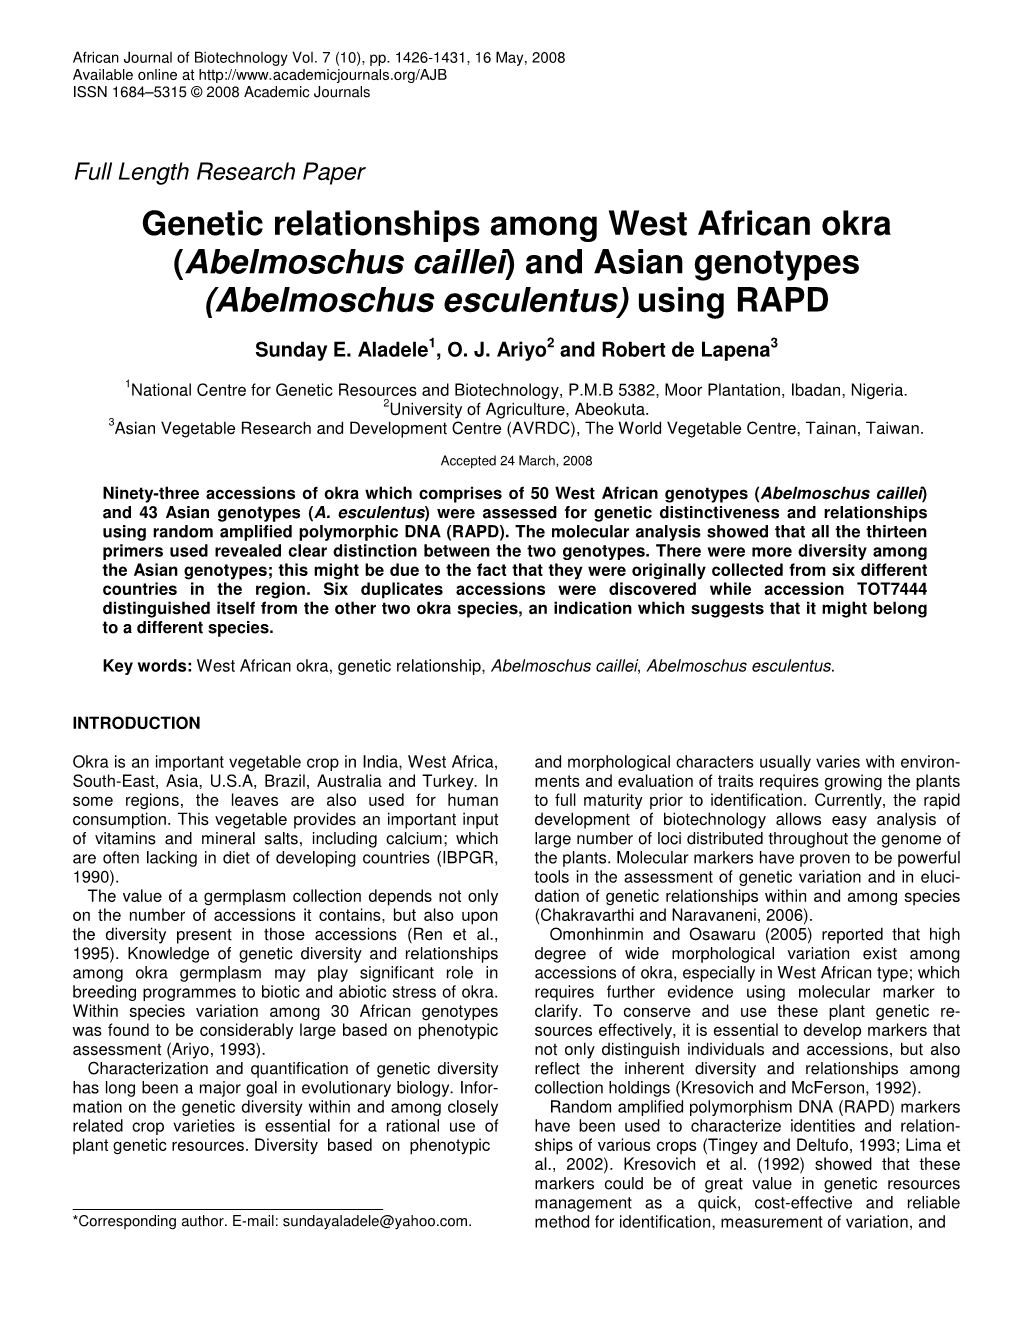 Genetic Relationships Among West African Okra (Abelmoschus Caillei) and Asian Genotypes (Abelmoschus Esculentus) Using RAPD